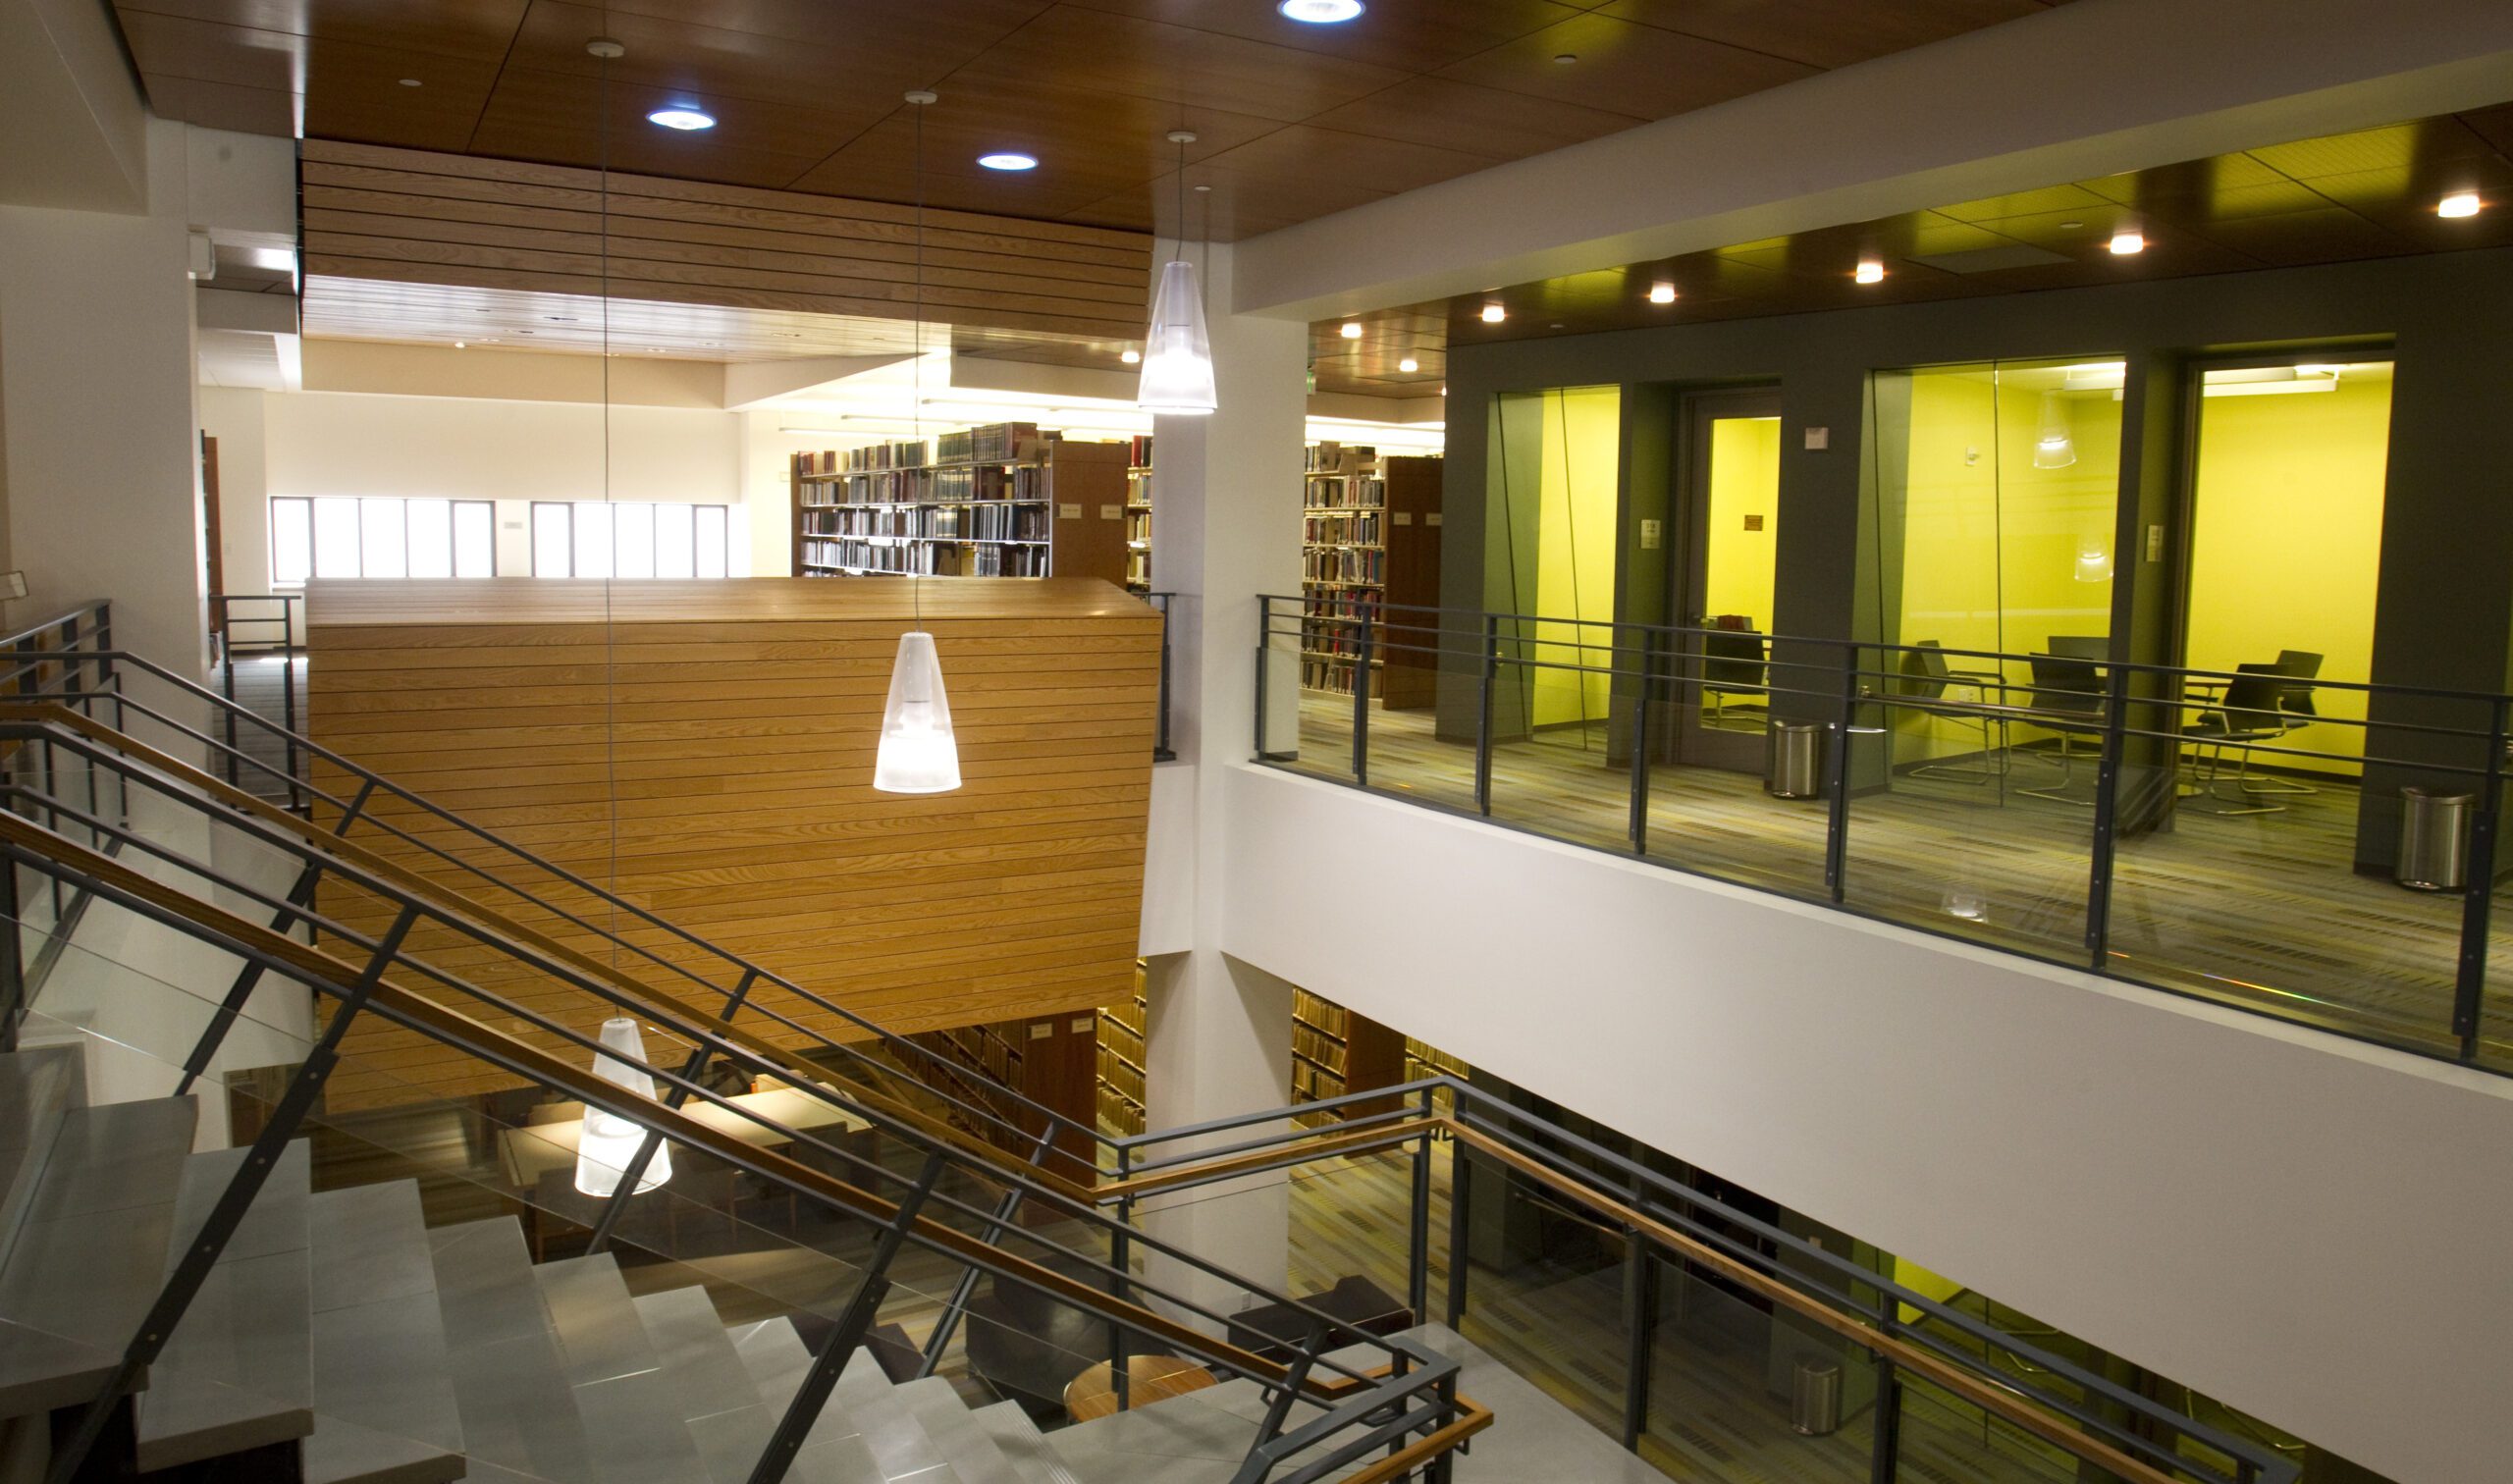 A view of the library's main staircase